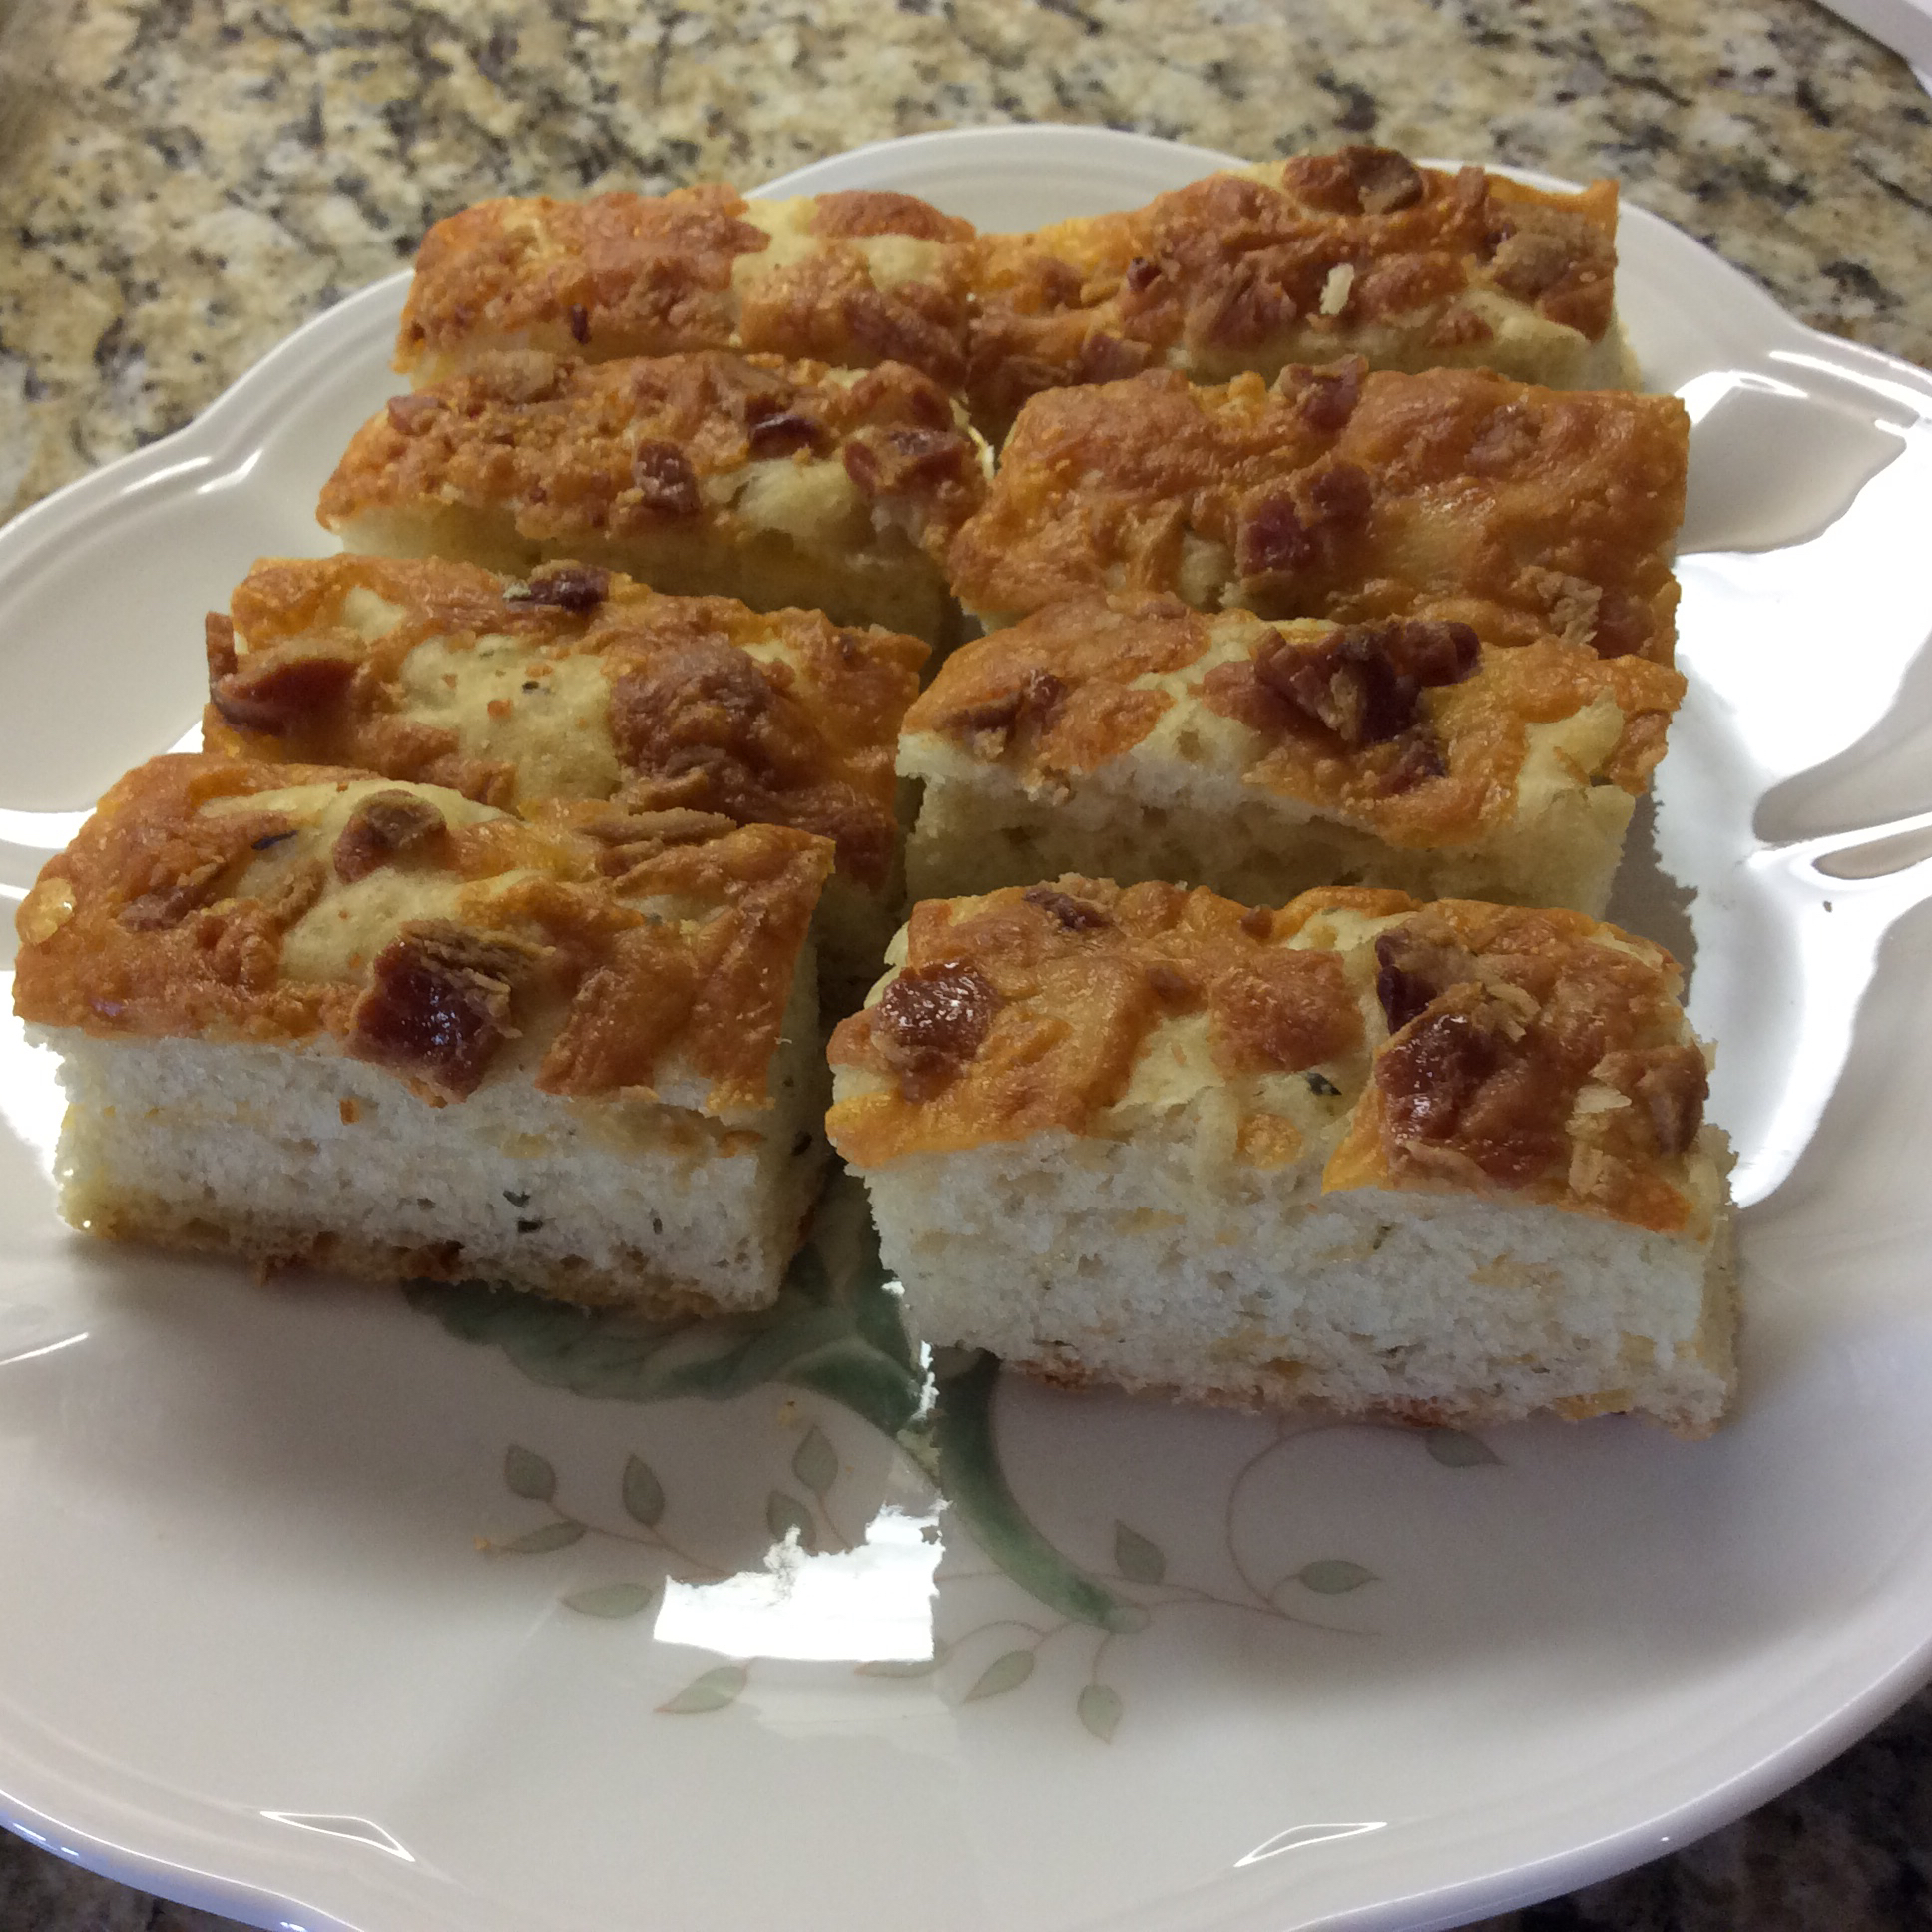 Bacon, Herb and Cheese Snack Bread